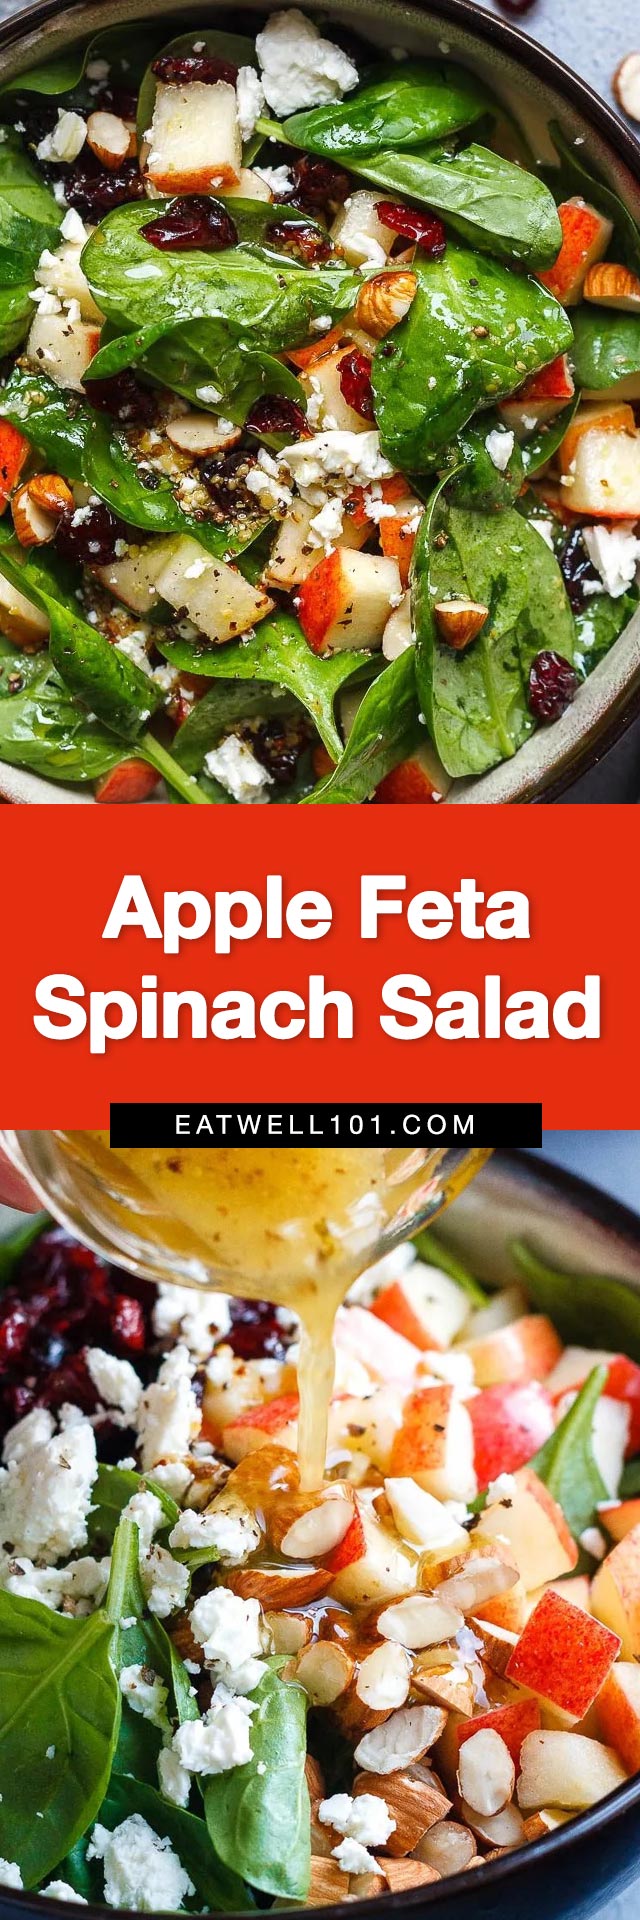 Apple Almond Feta Spinach Salad - #spinach #salad #recipe #eatwell101 - Crunchy, sweet and easy to make, this healthy spinach salad is full of fresh flavors.